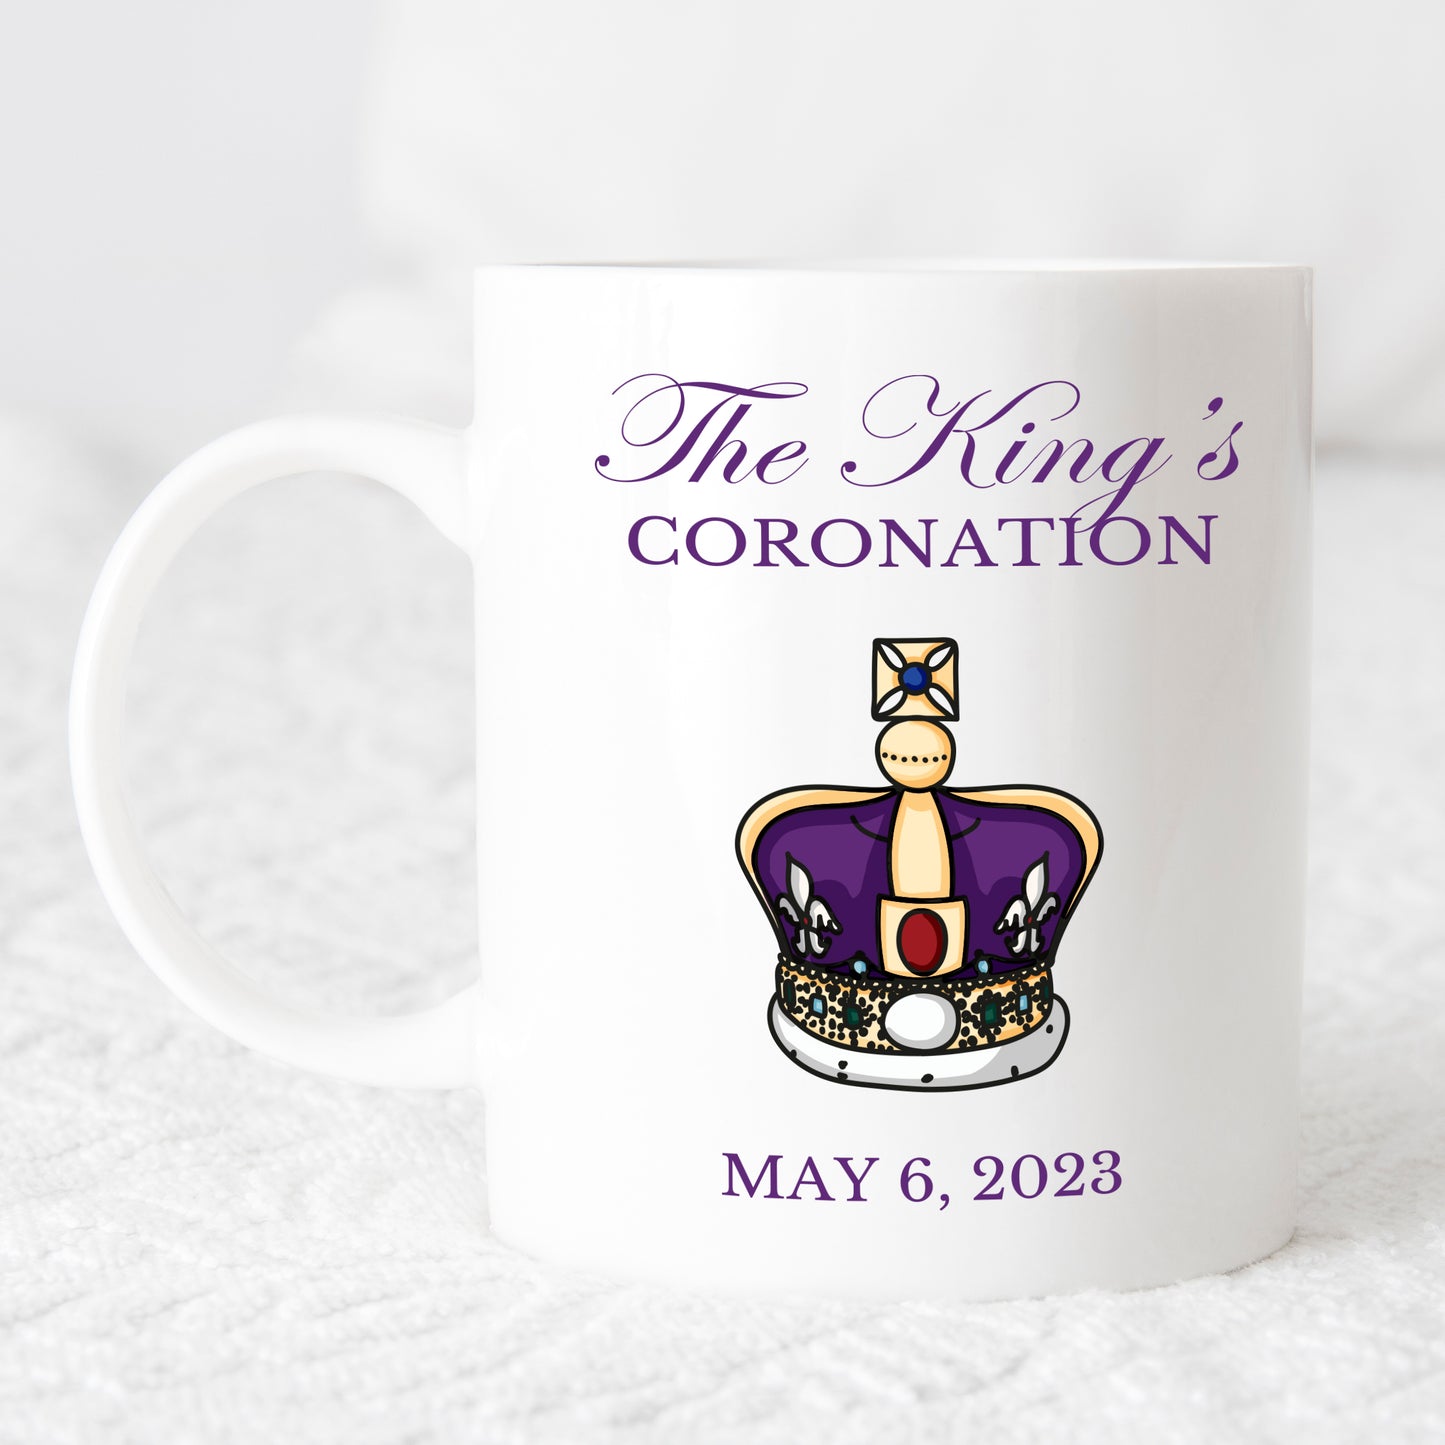 white mug printed withkings coronation in purple with royal crown and date 6 May 2023